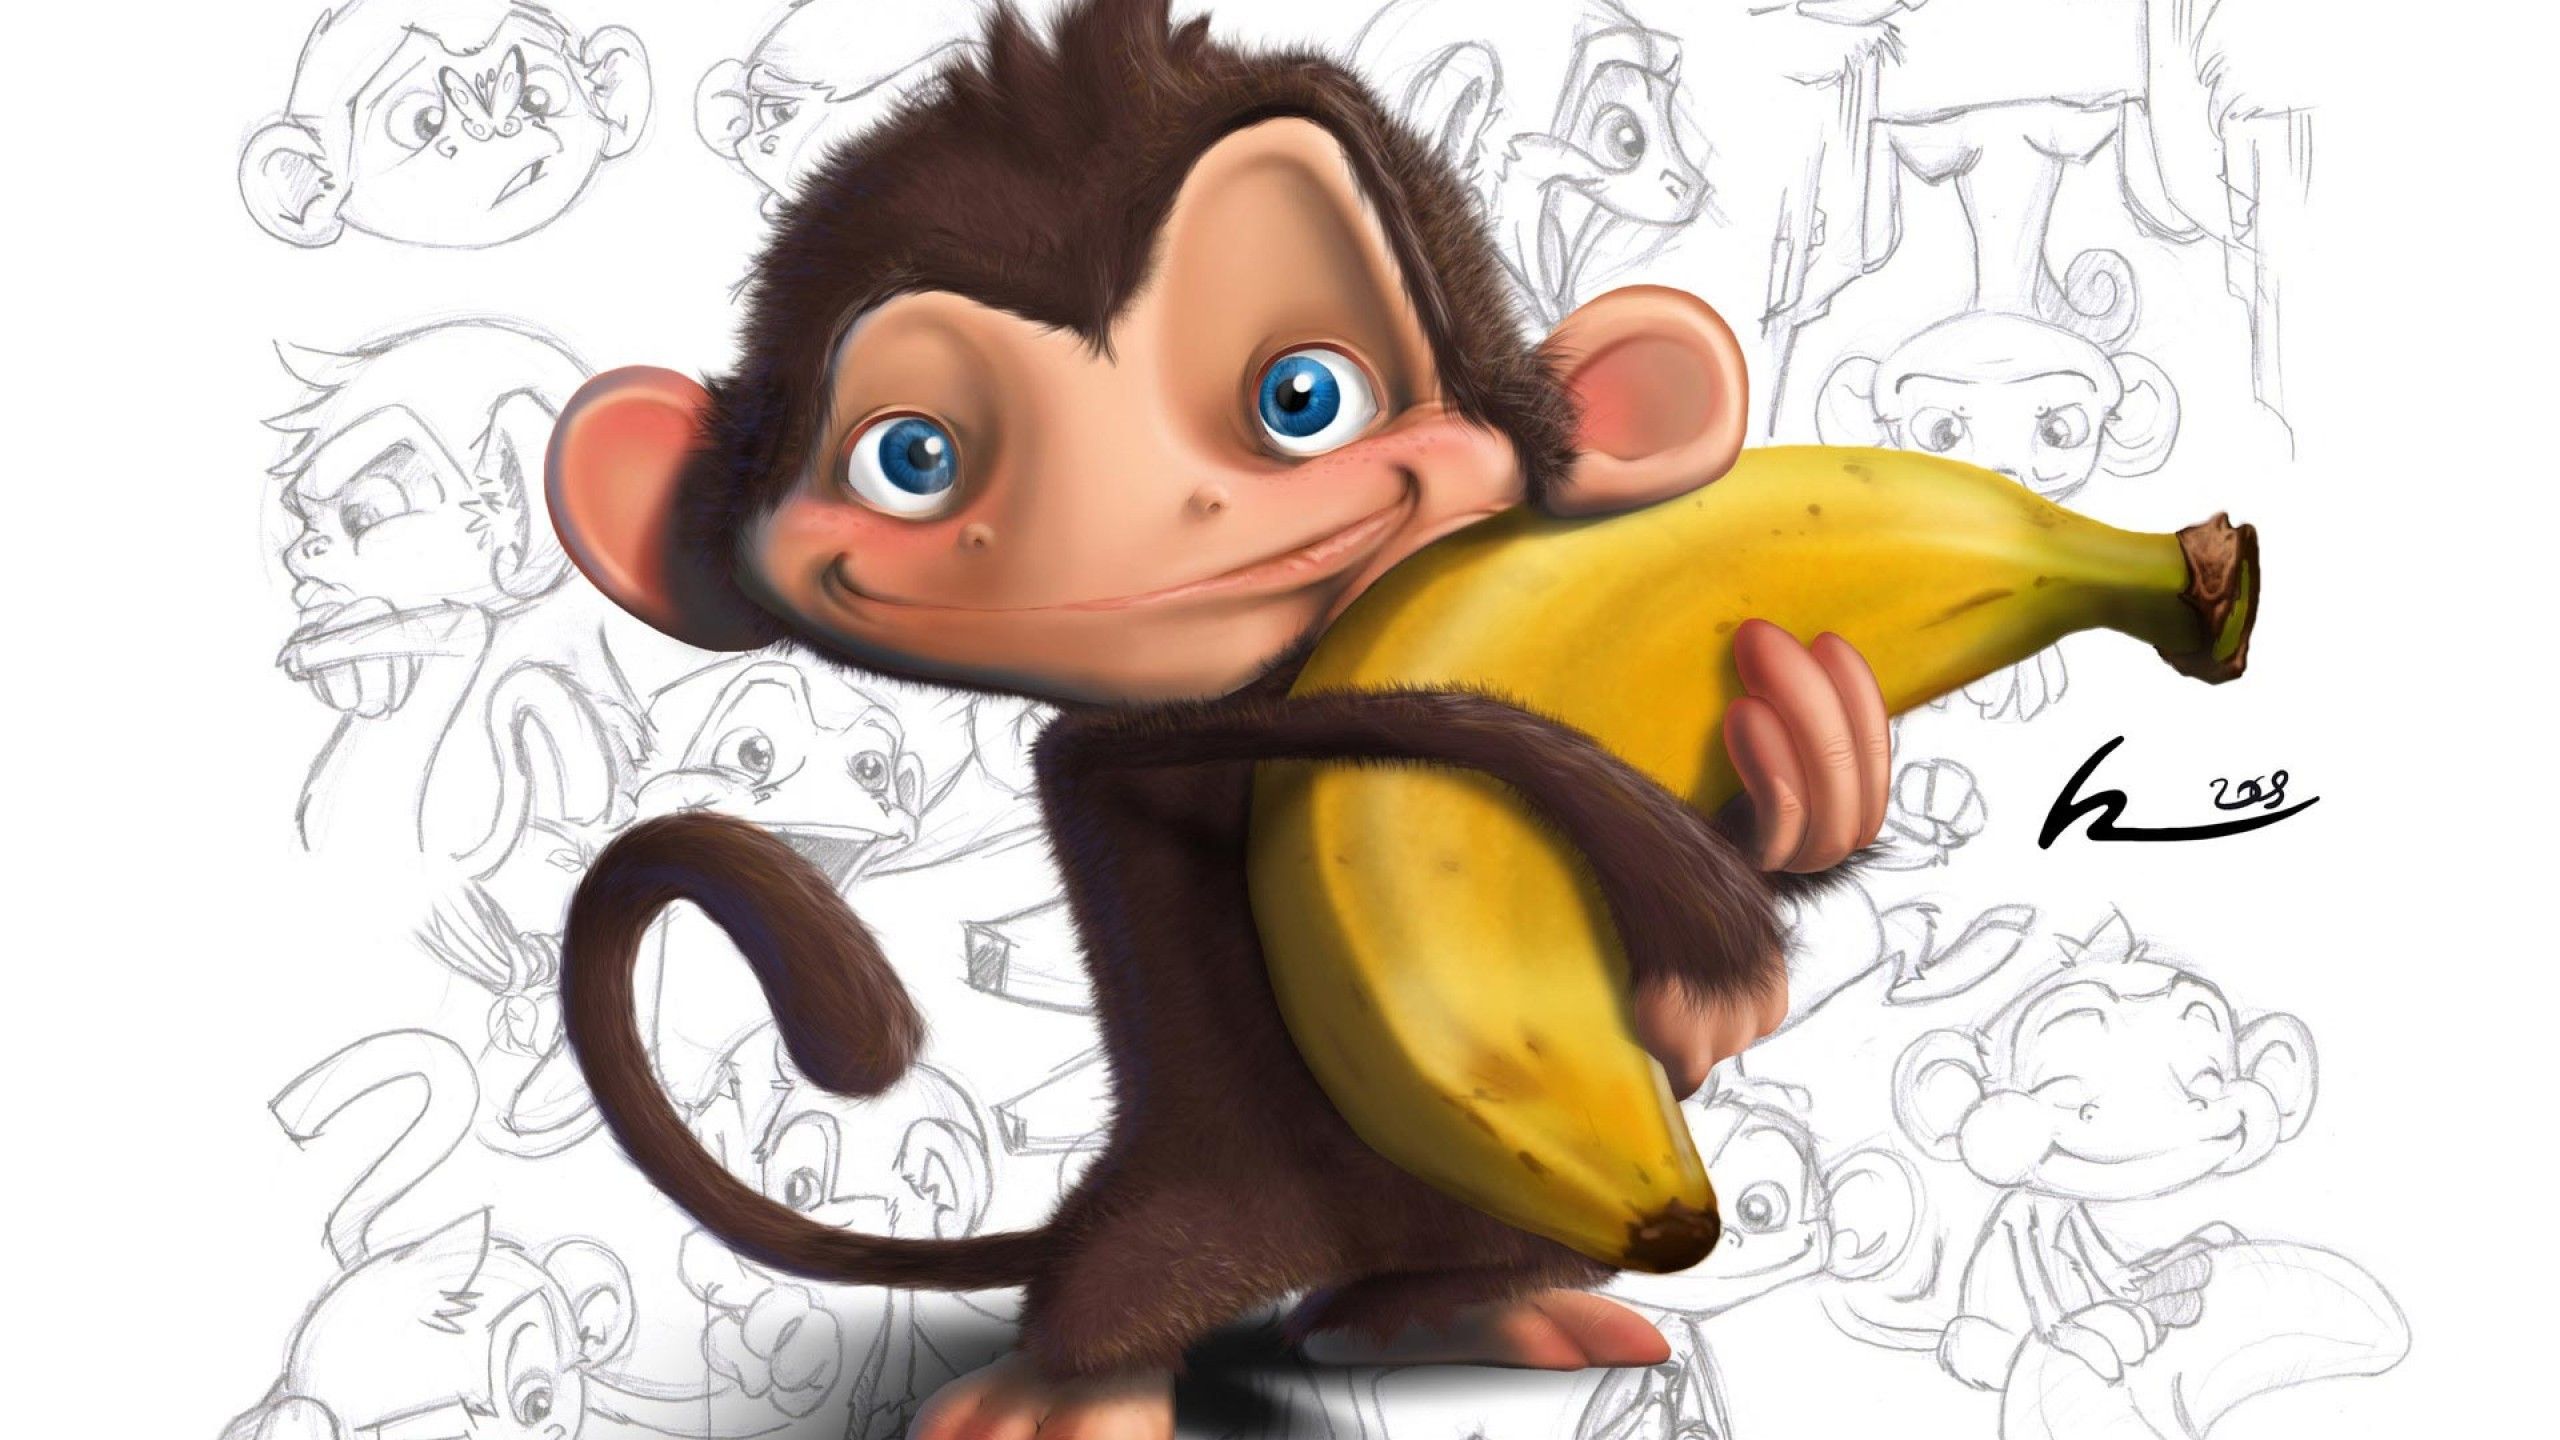 Other: Banana Love Monkey Funny Cartoon Cute Pets Free Wallpapers ...